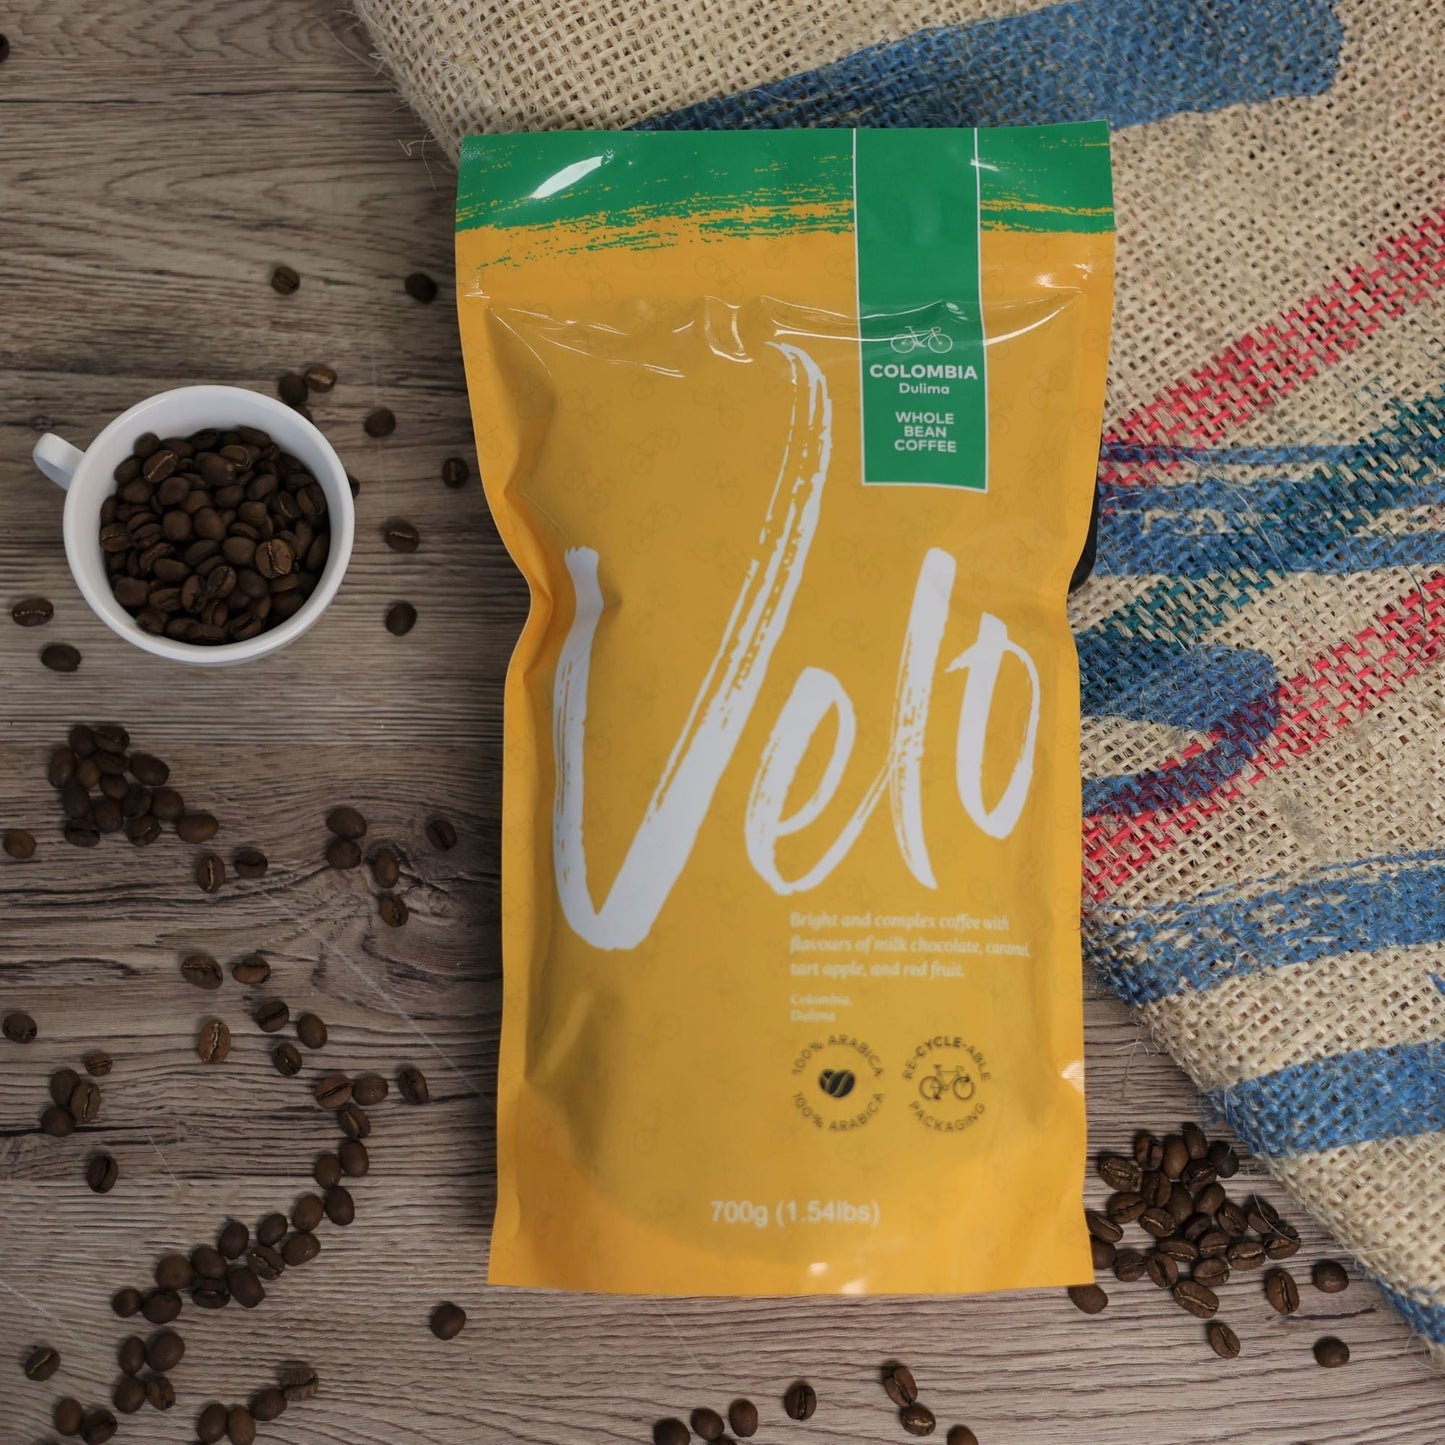 Load image into Gallery viewer, Dulima 700g Coffee from Colombia Coffee Bag Yellow with Pink strip across top for Whole bean - Velo Coffee Roasters
